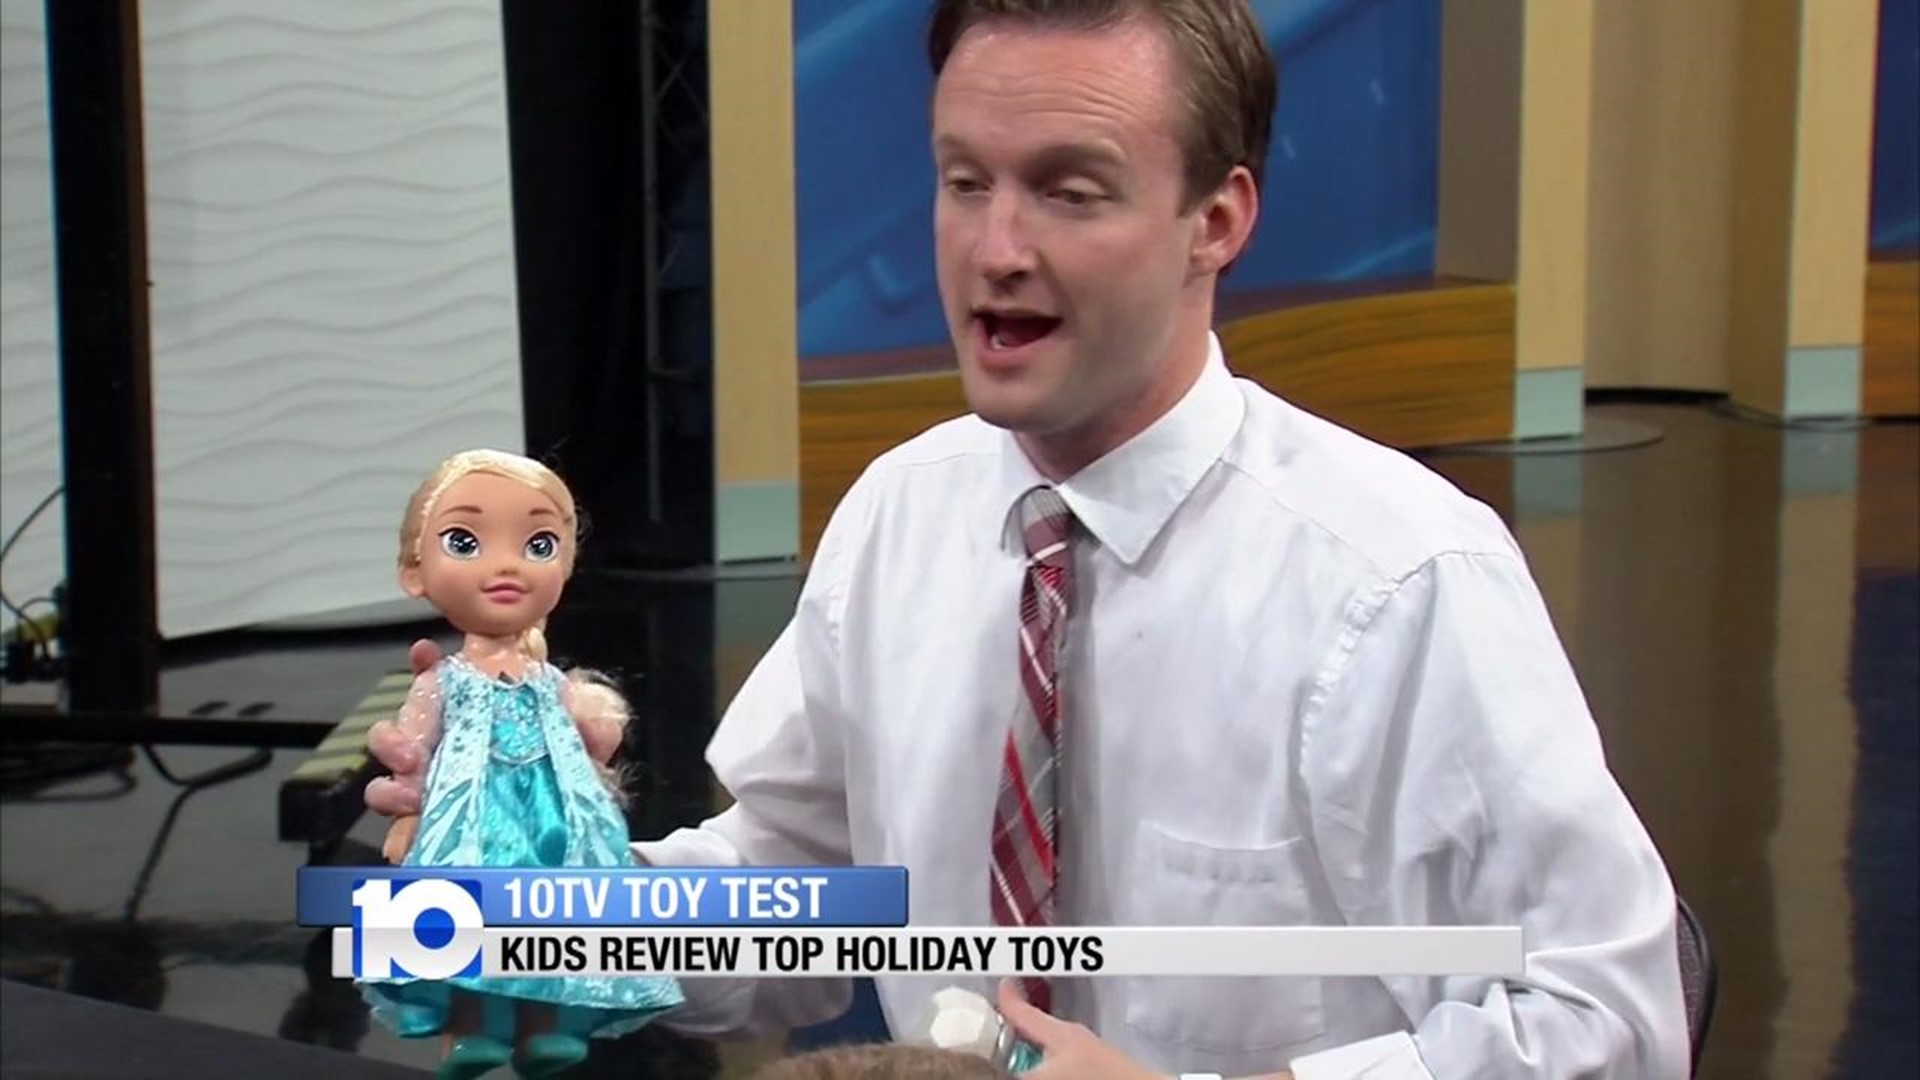 Are These Popular Christmas Toys Worth The Money? Kids Put Them Test | 10tv.com